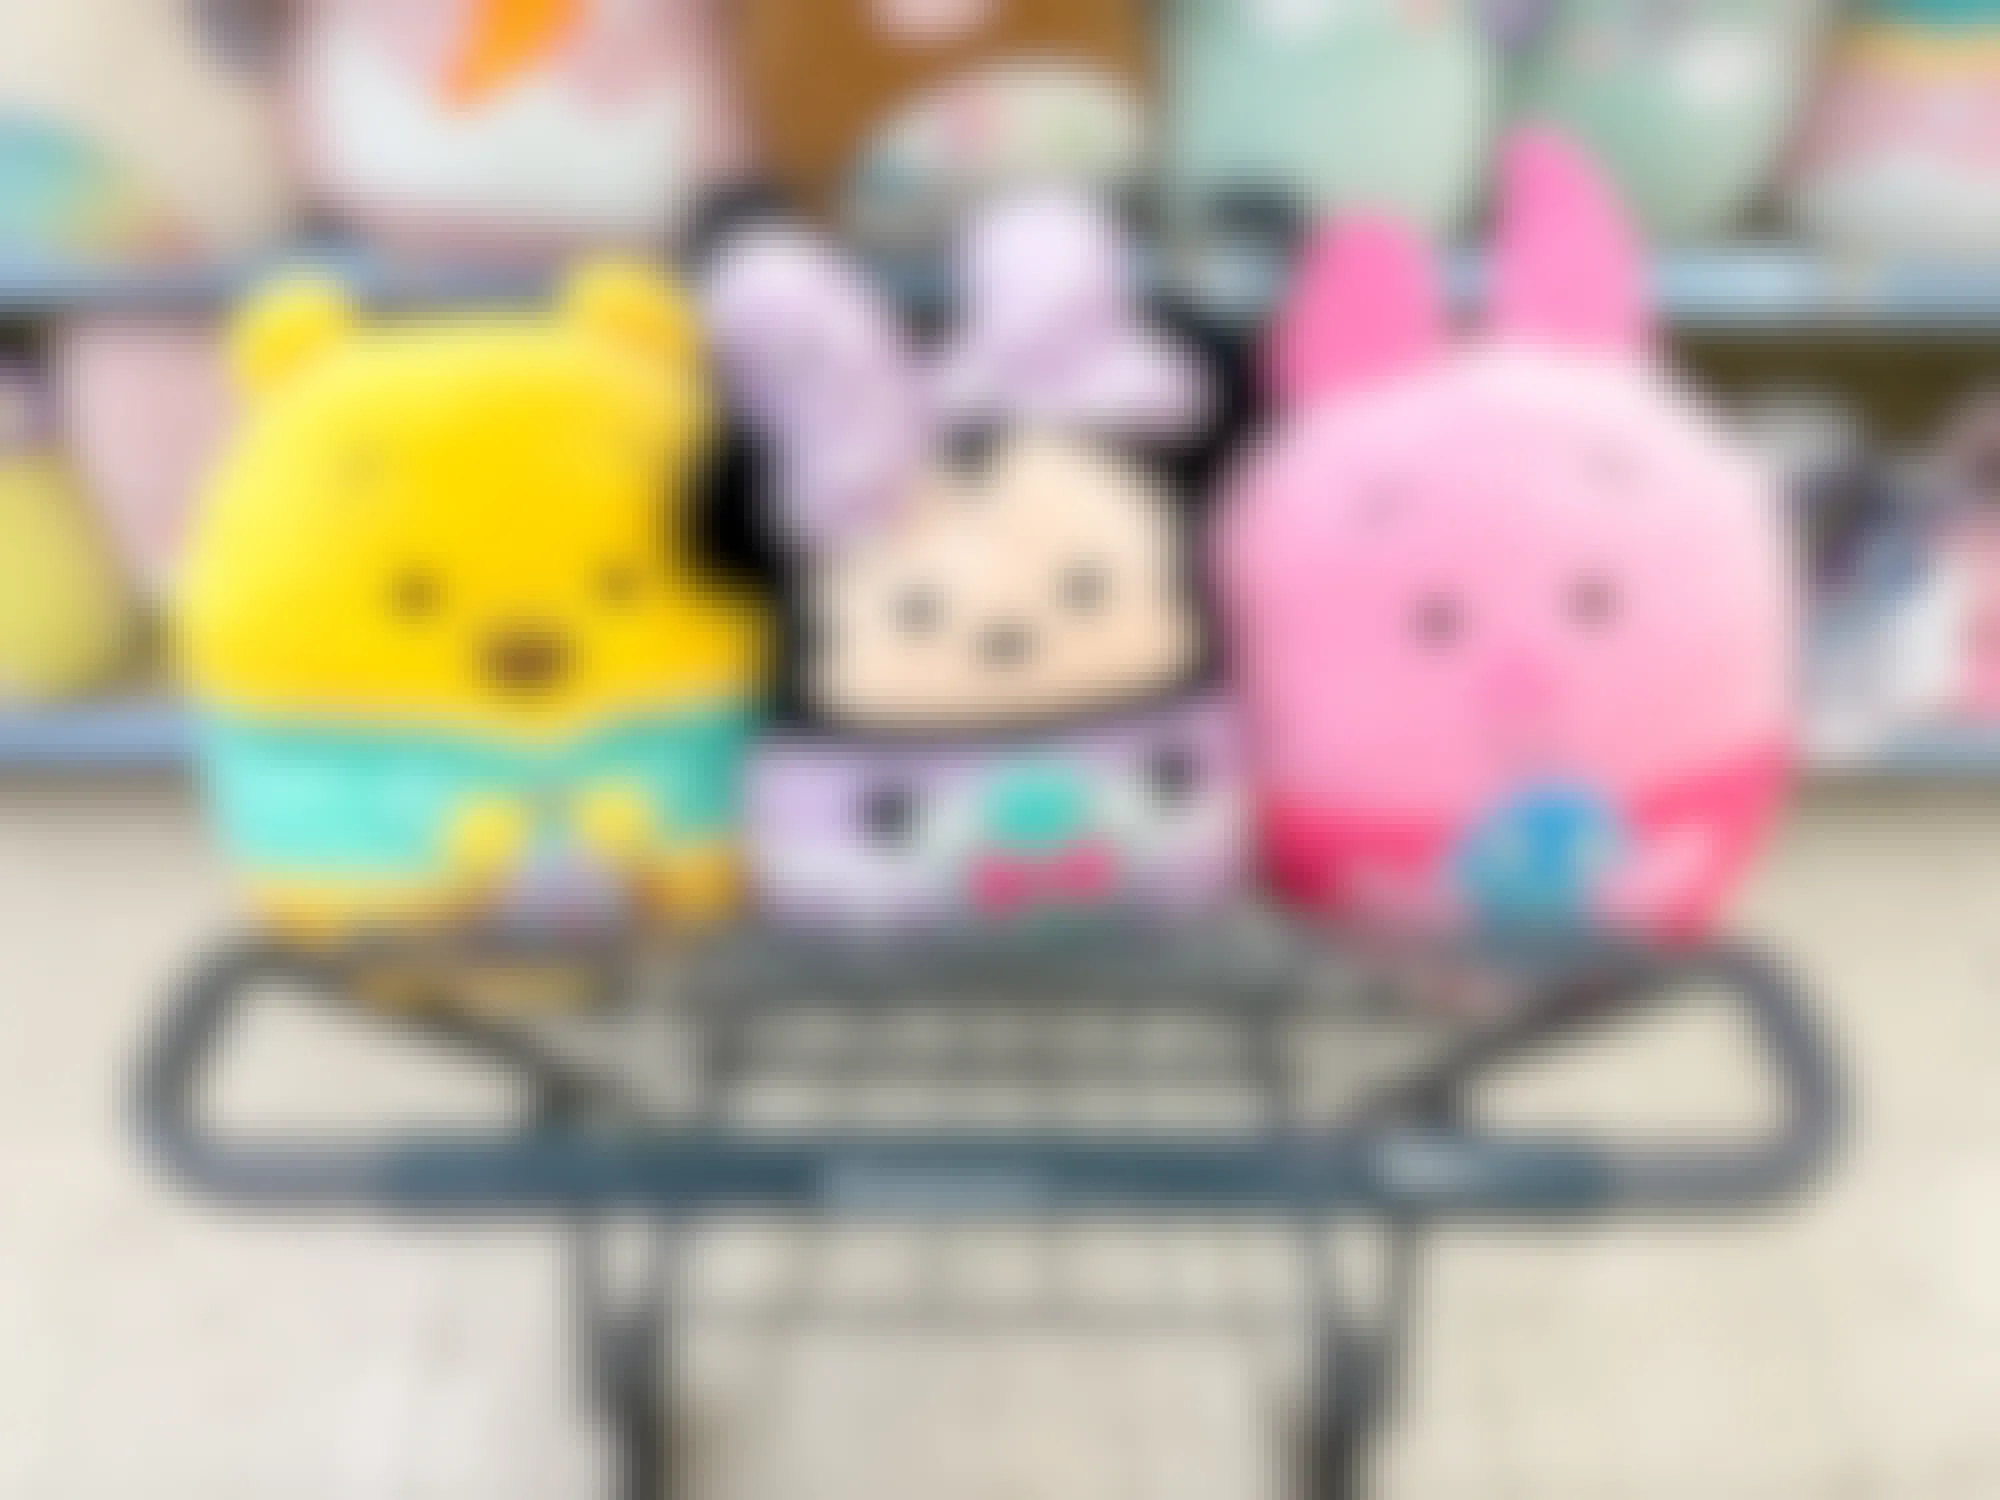 Some Disney Easter Squishmallows in a Walgreens cart